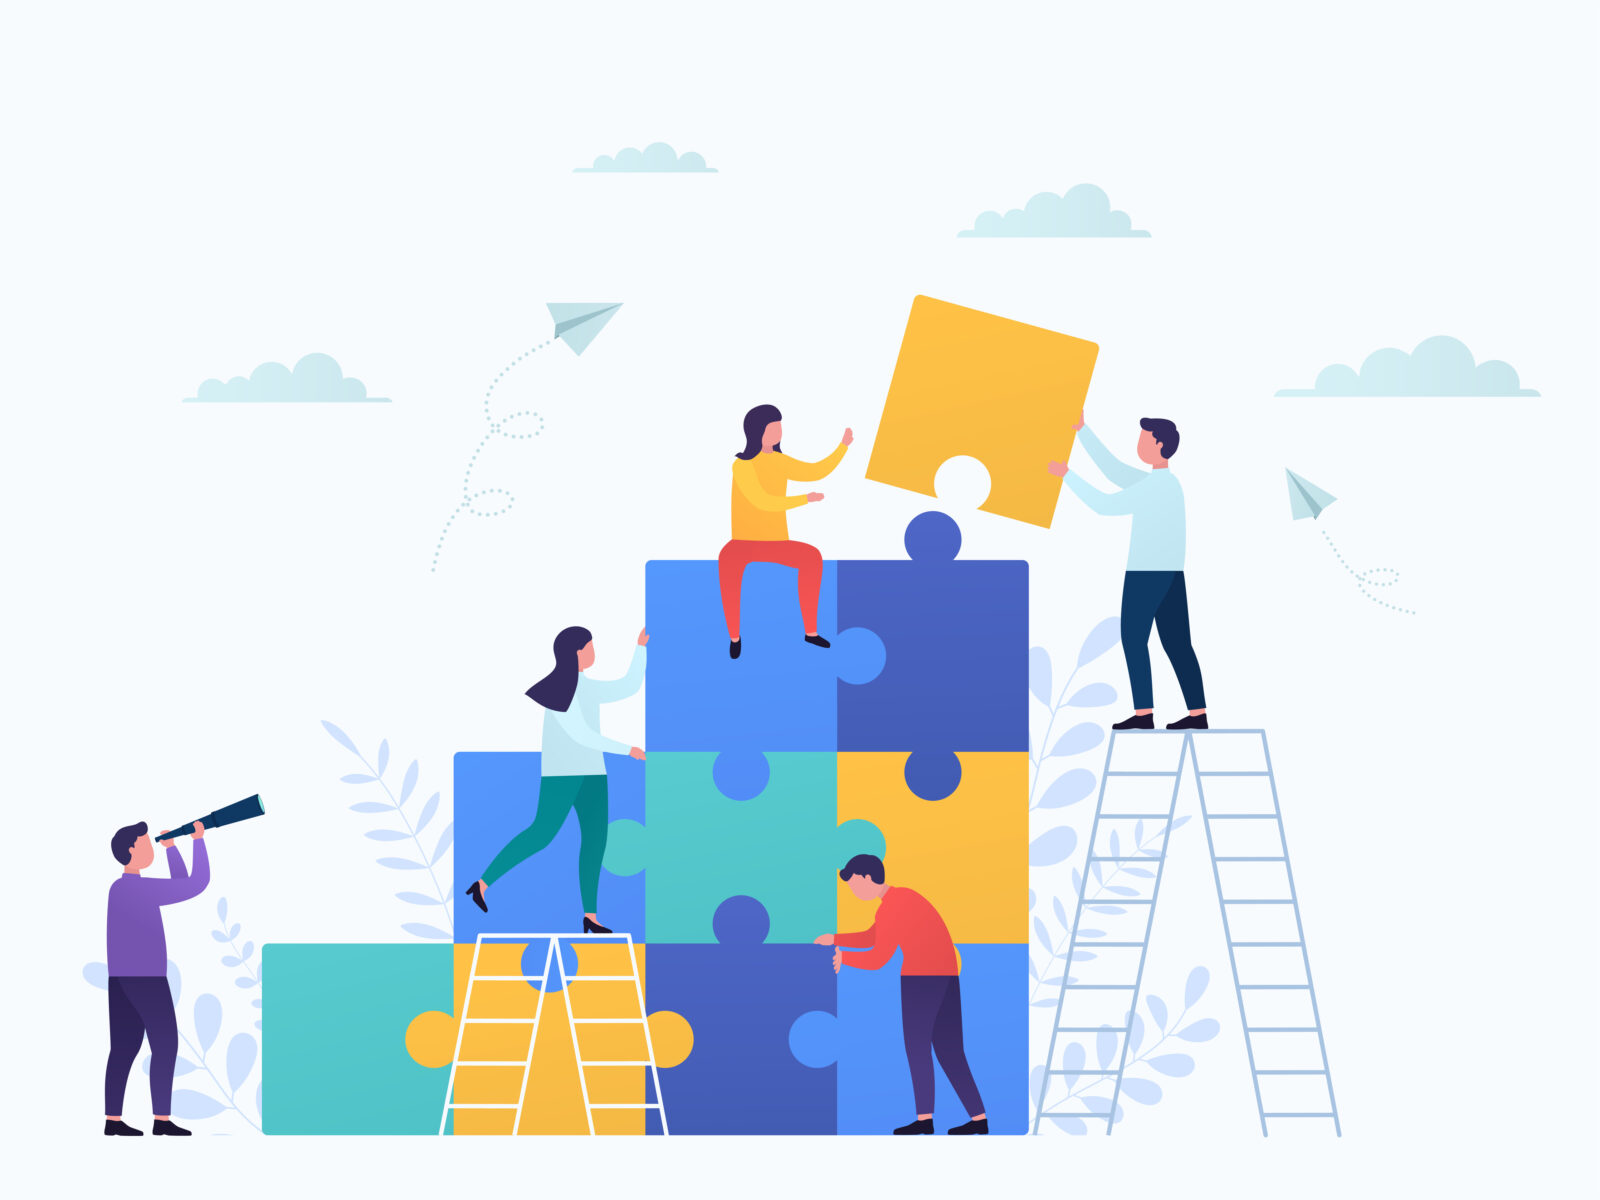 Coworkers connect puzzle pieces, teamwork. Business concept partnership, cooperation of businessmen and businesswomen, career growth, development and success.